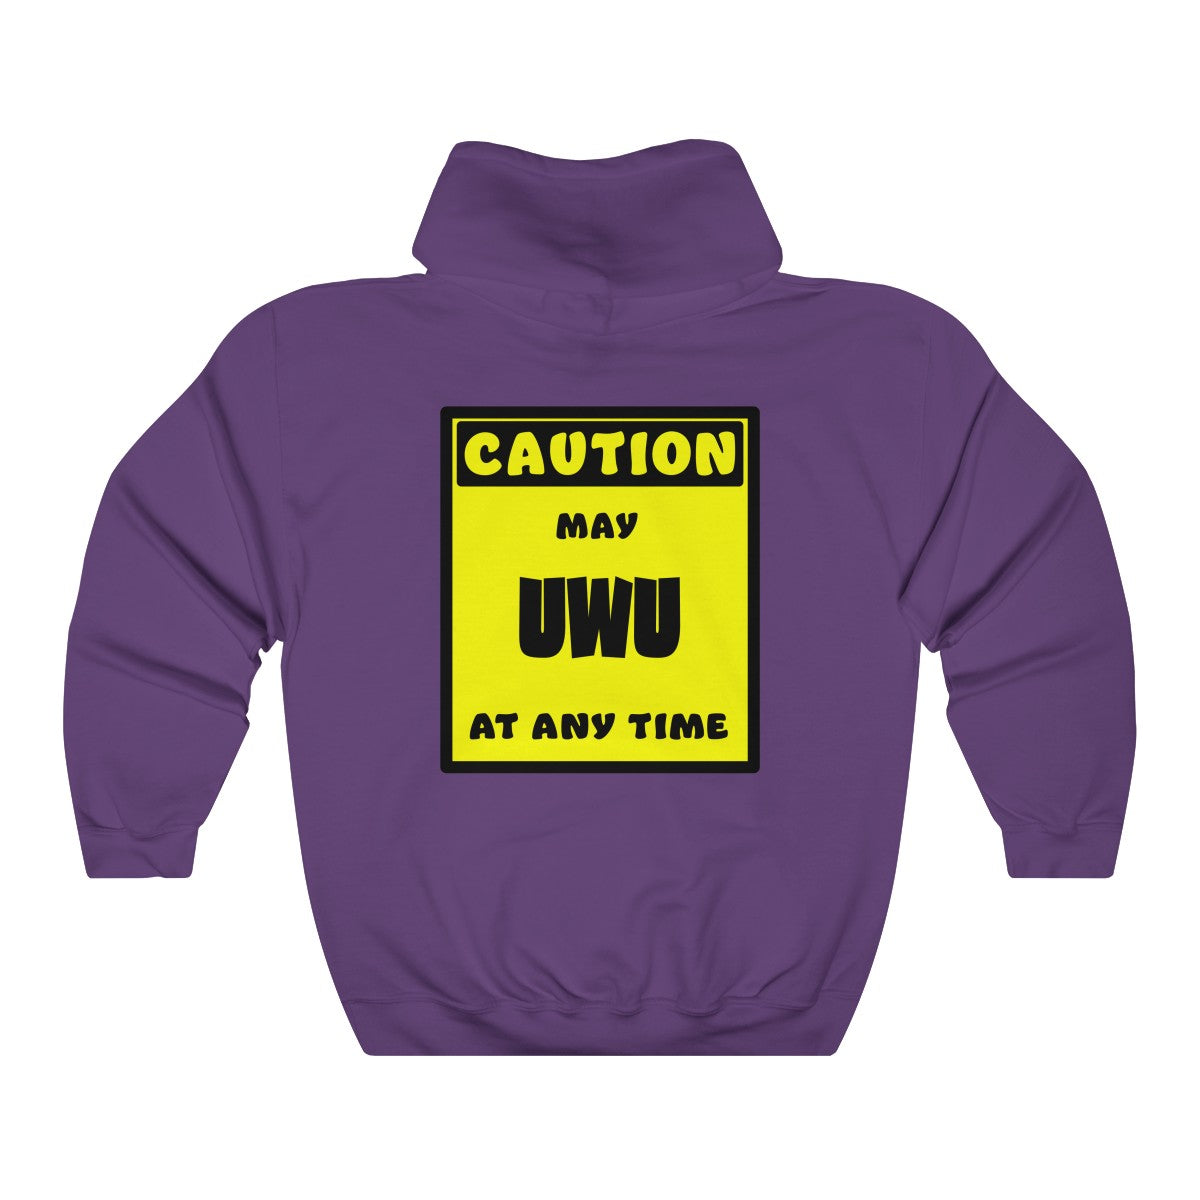 CAUTION! May UWU at any time! - Hoodie Hoodie AFLT-Whootorca Purple S 